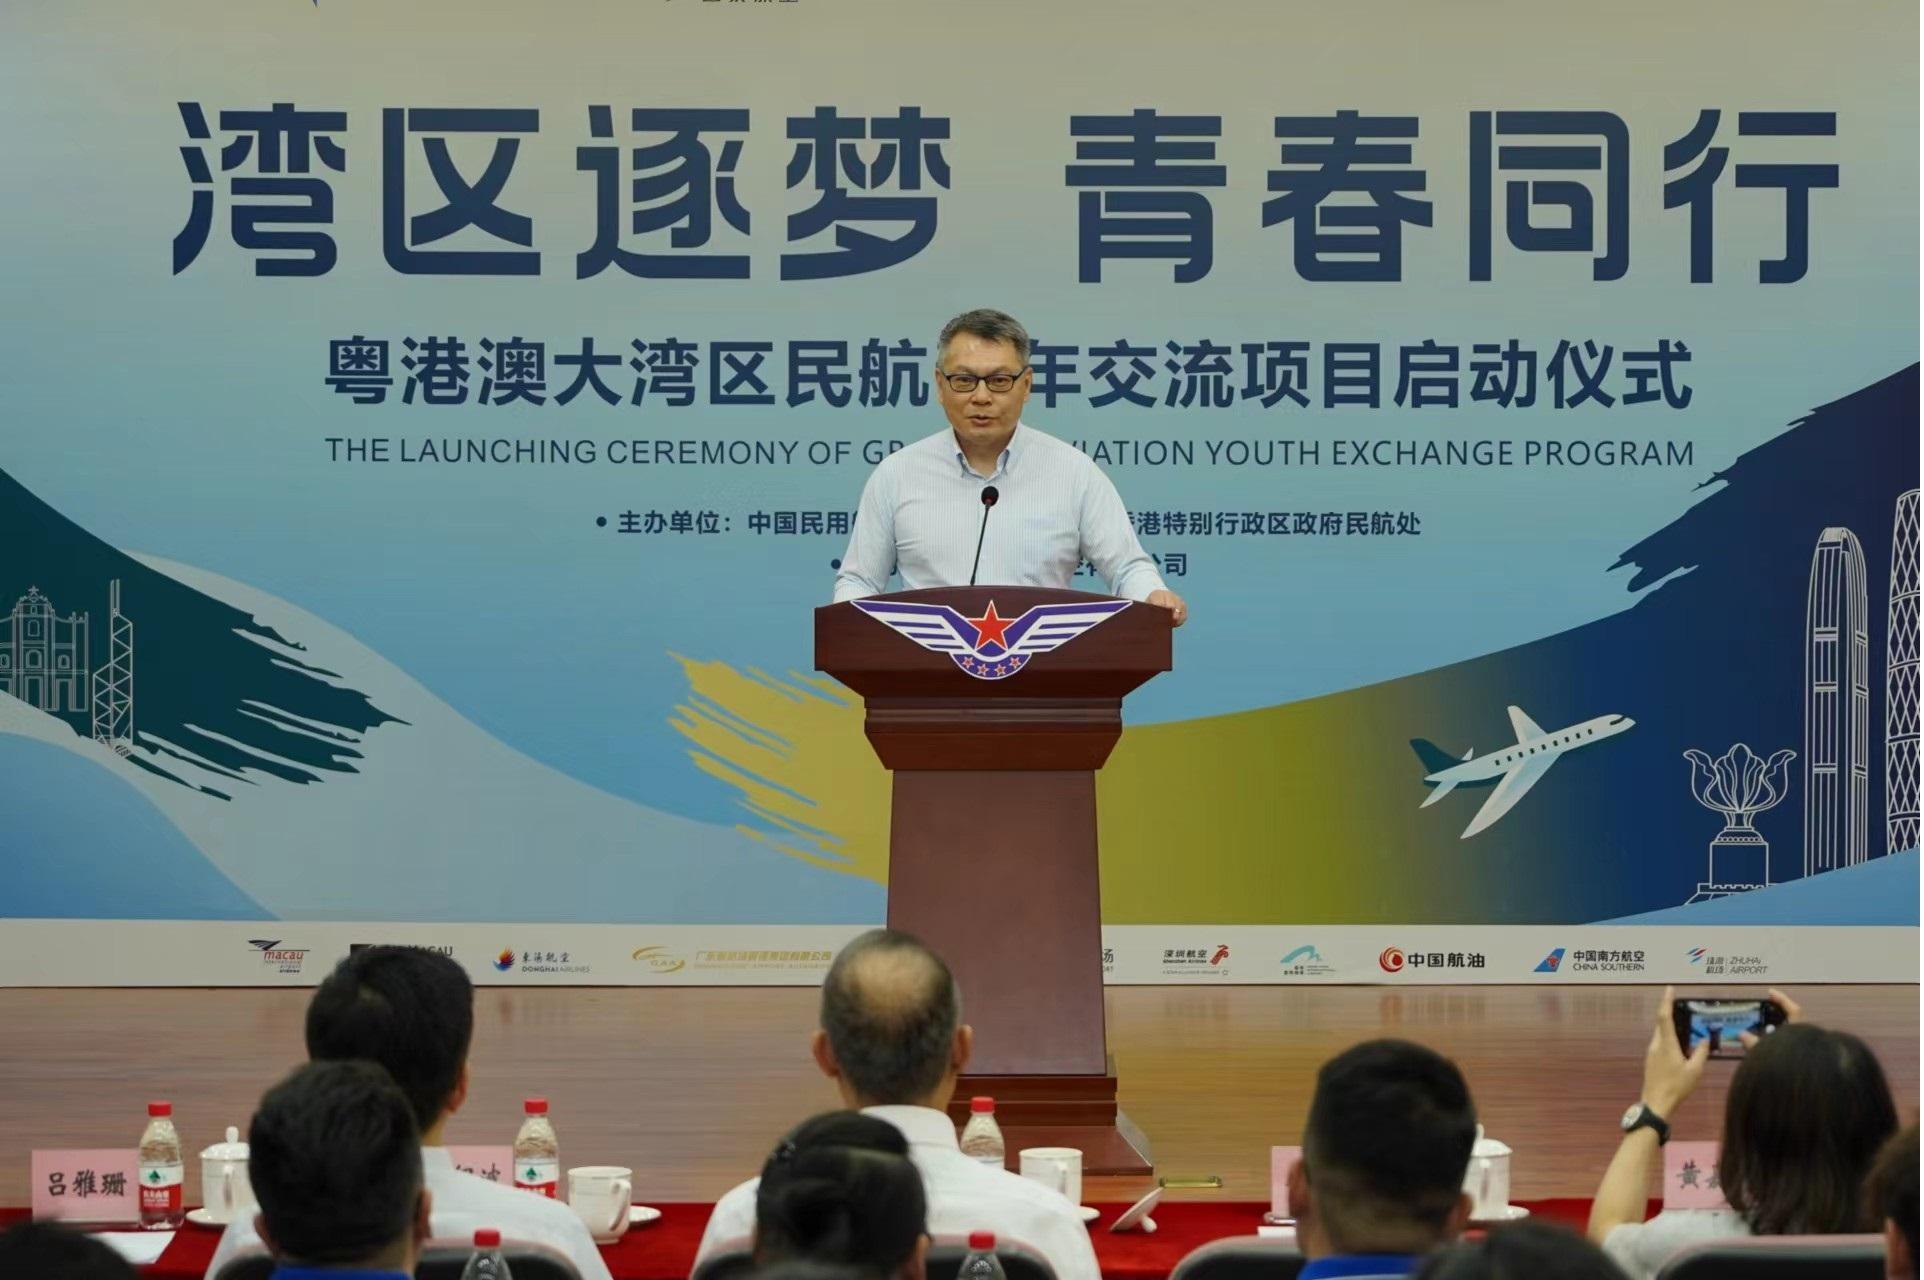 The Launching Ceremony of the Guangdong-Hong Kong-Macao Greater Bay Area Civil Aviation Youth Exchange Program, jointly organised by the Central and Southern Regional Administration of the Civil Aviation Administration of China and the Civil Aviation Department, took place in Guangzhou today (May 17). Photo shows the Director-General of Civil Aviation, Mr Victor Liu, addressing the ceremony. 